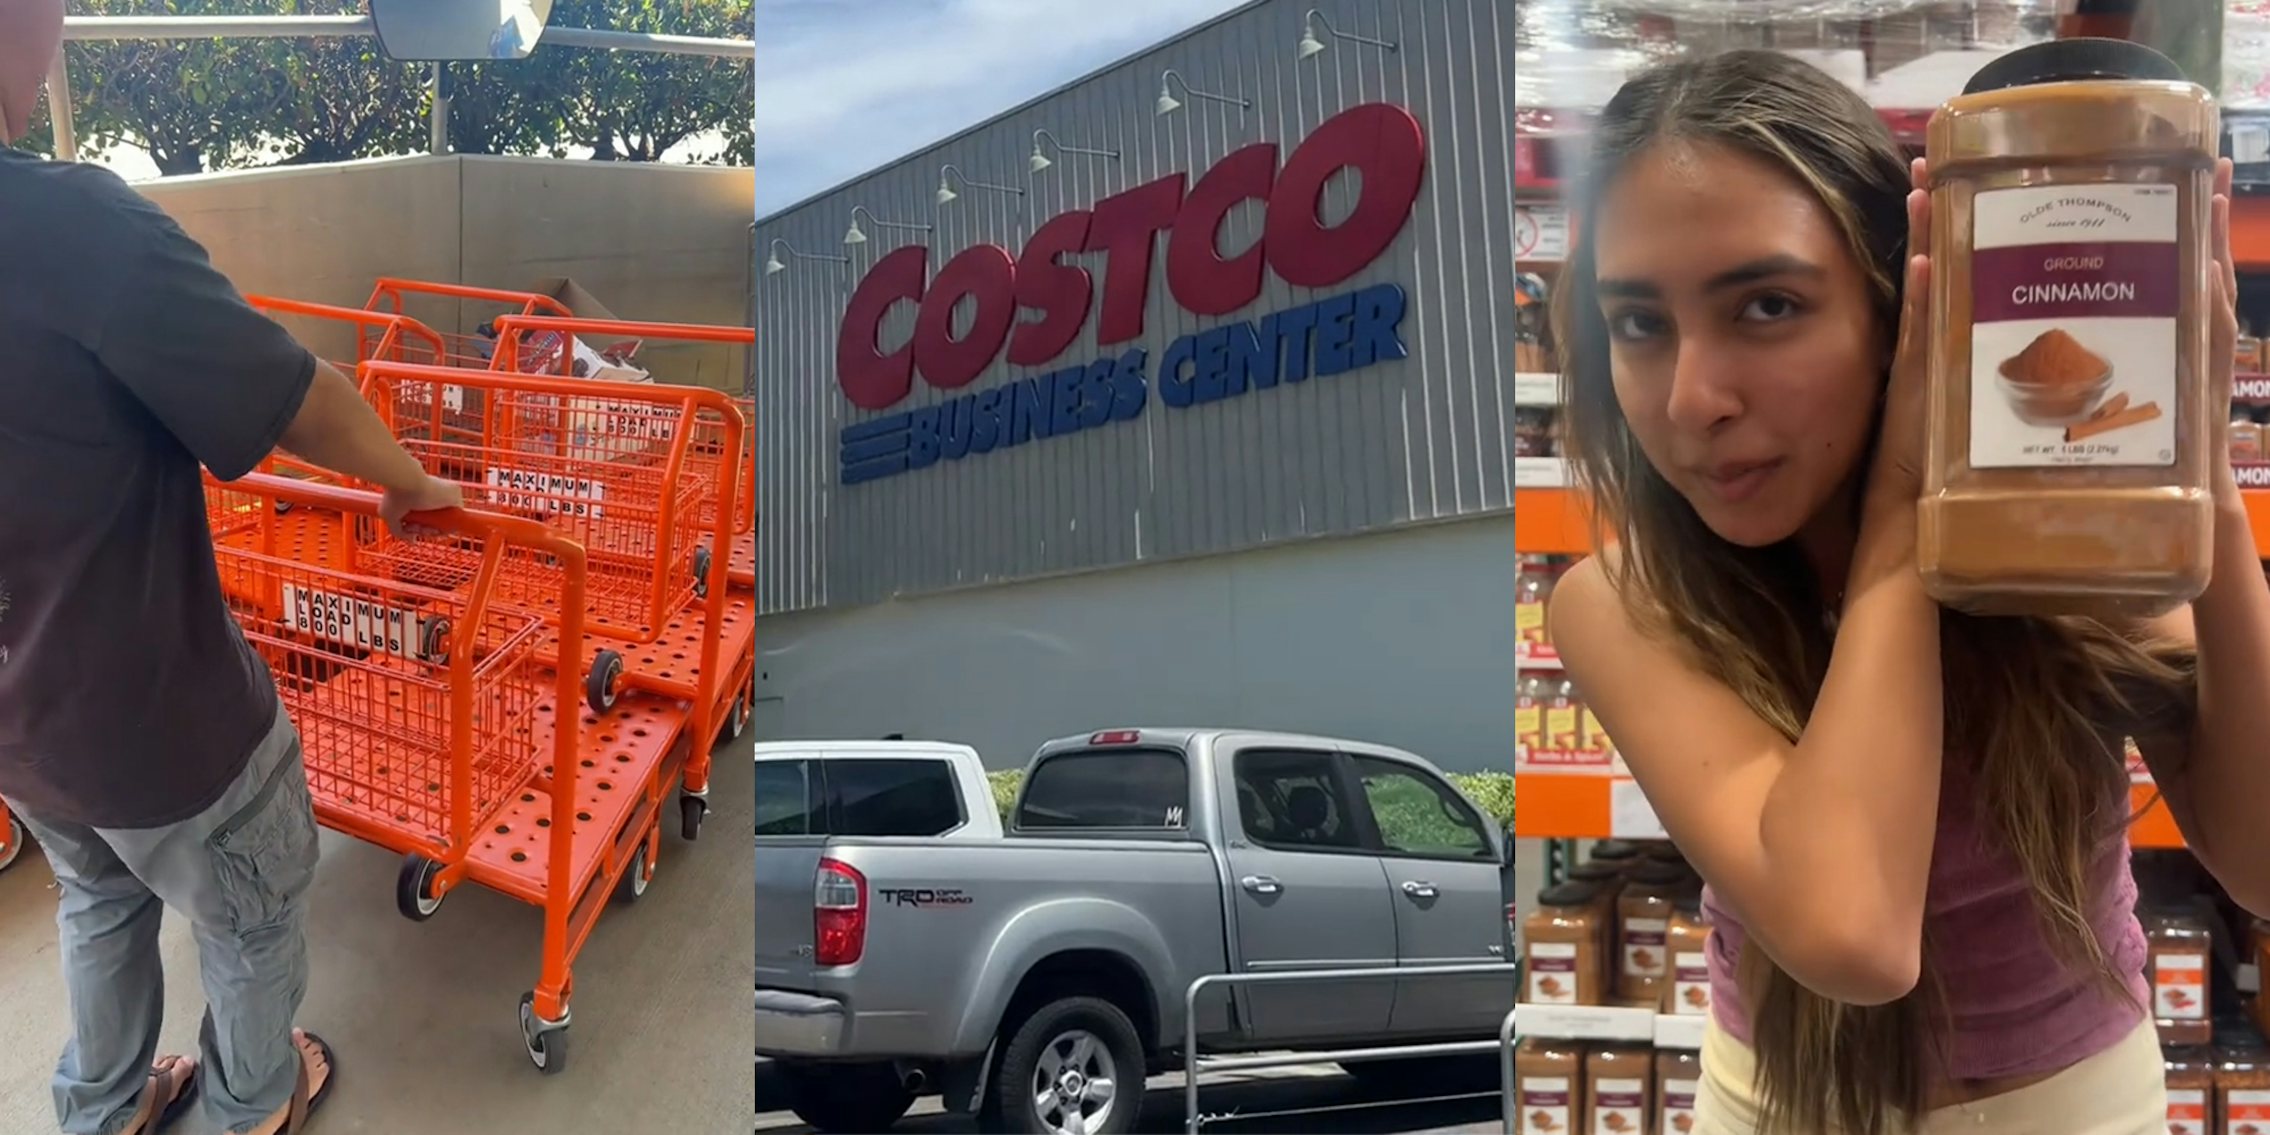 man with large flat cart (l) costco business center (c) young woman with large cinnamon container (r)